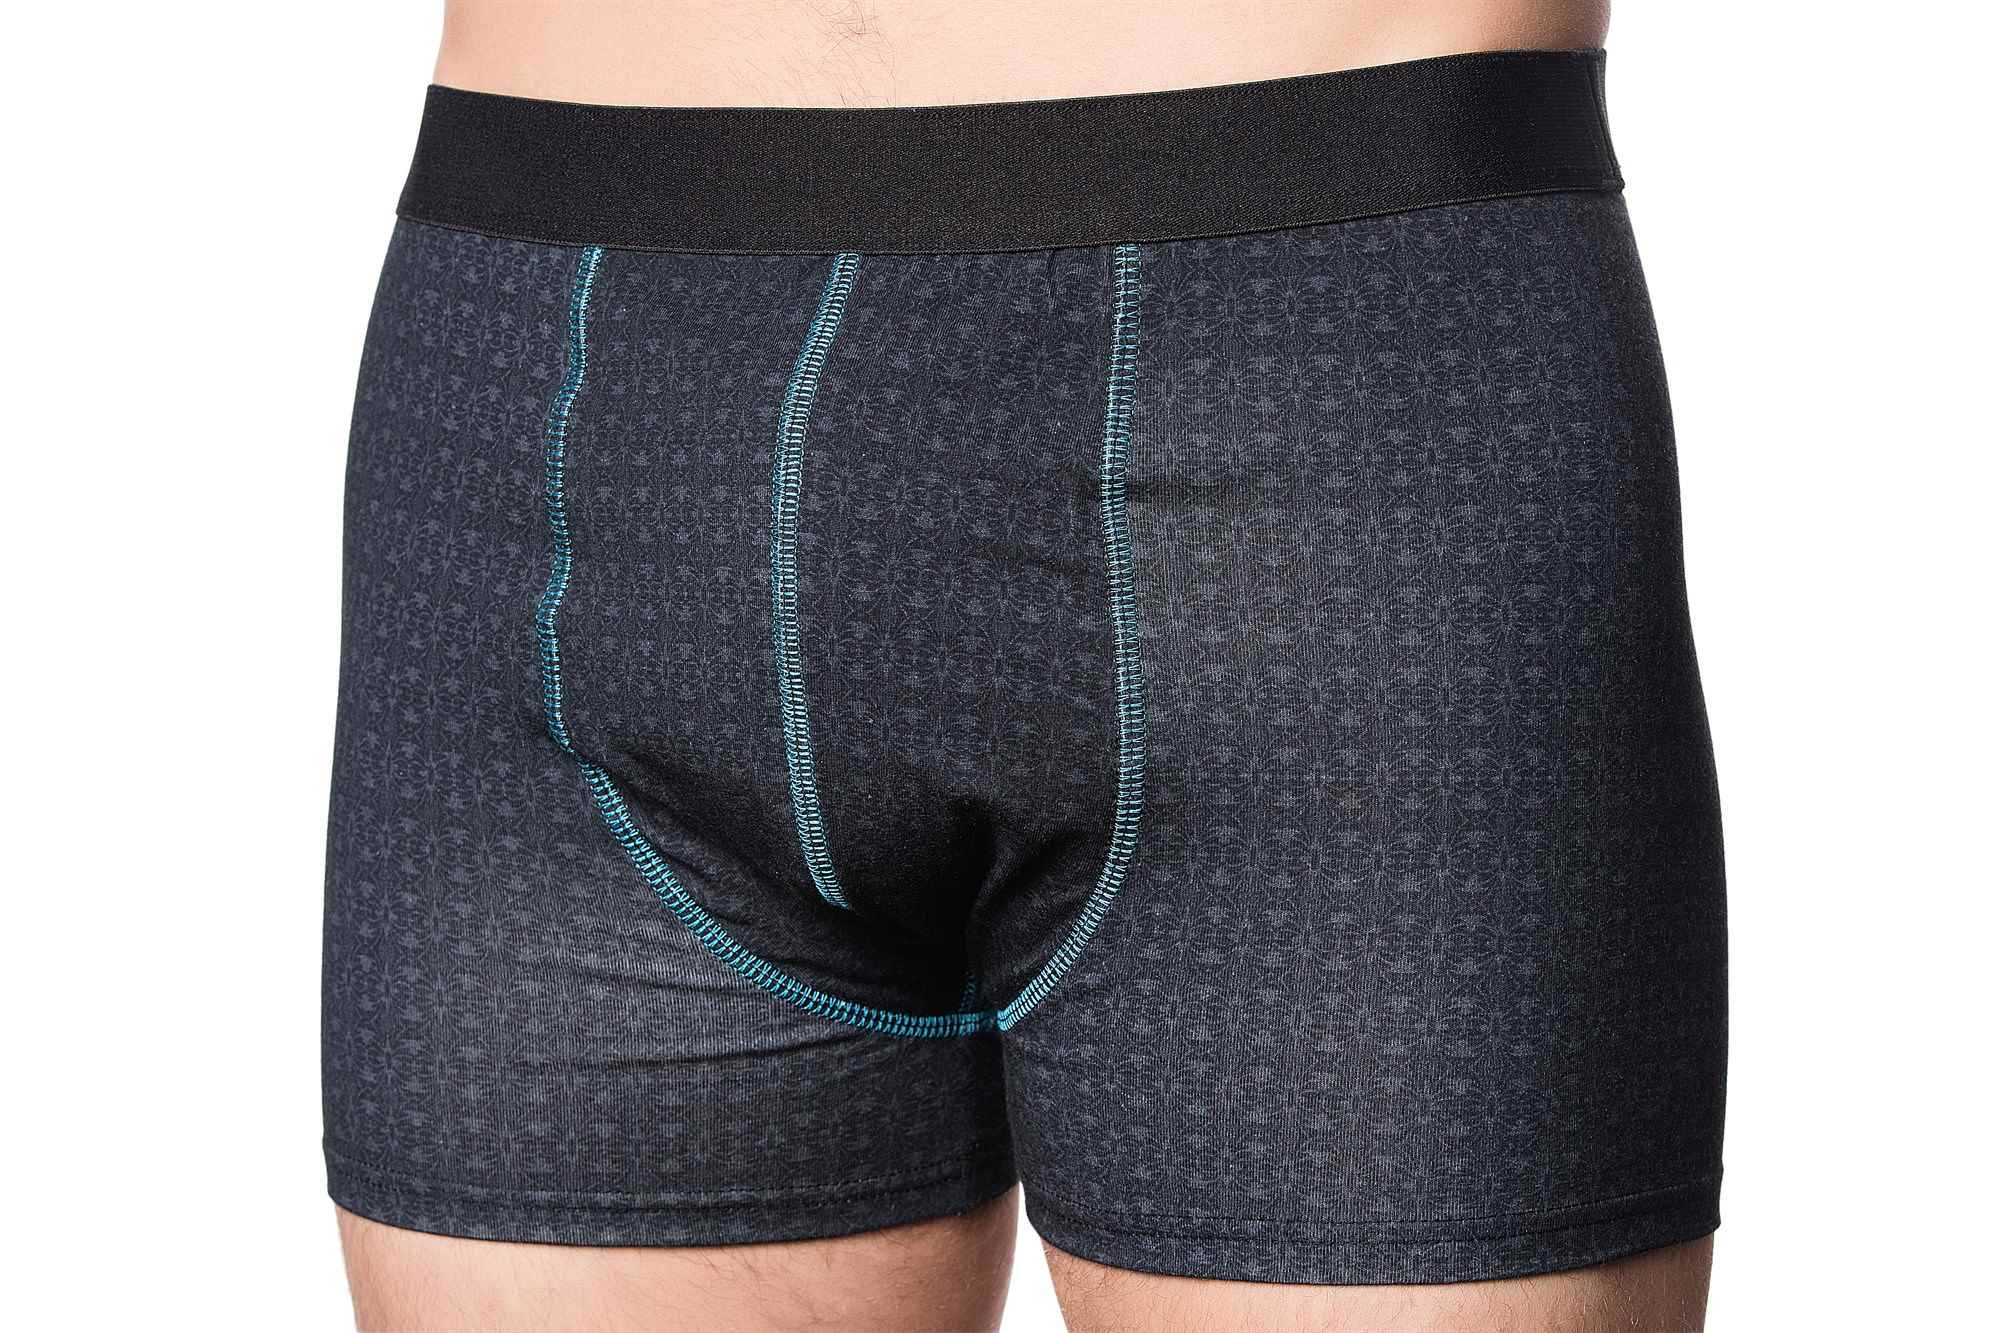 14 Amazing Men’s Incontinence Underwear for 2023